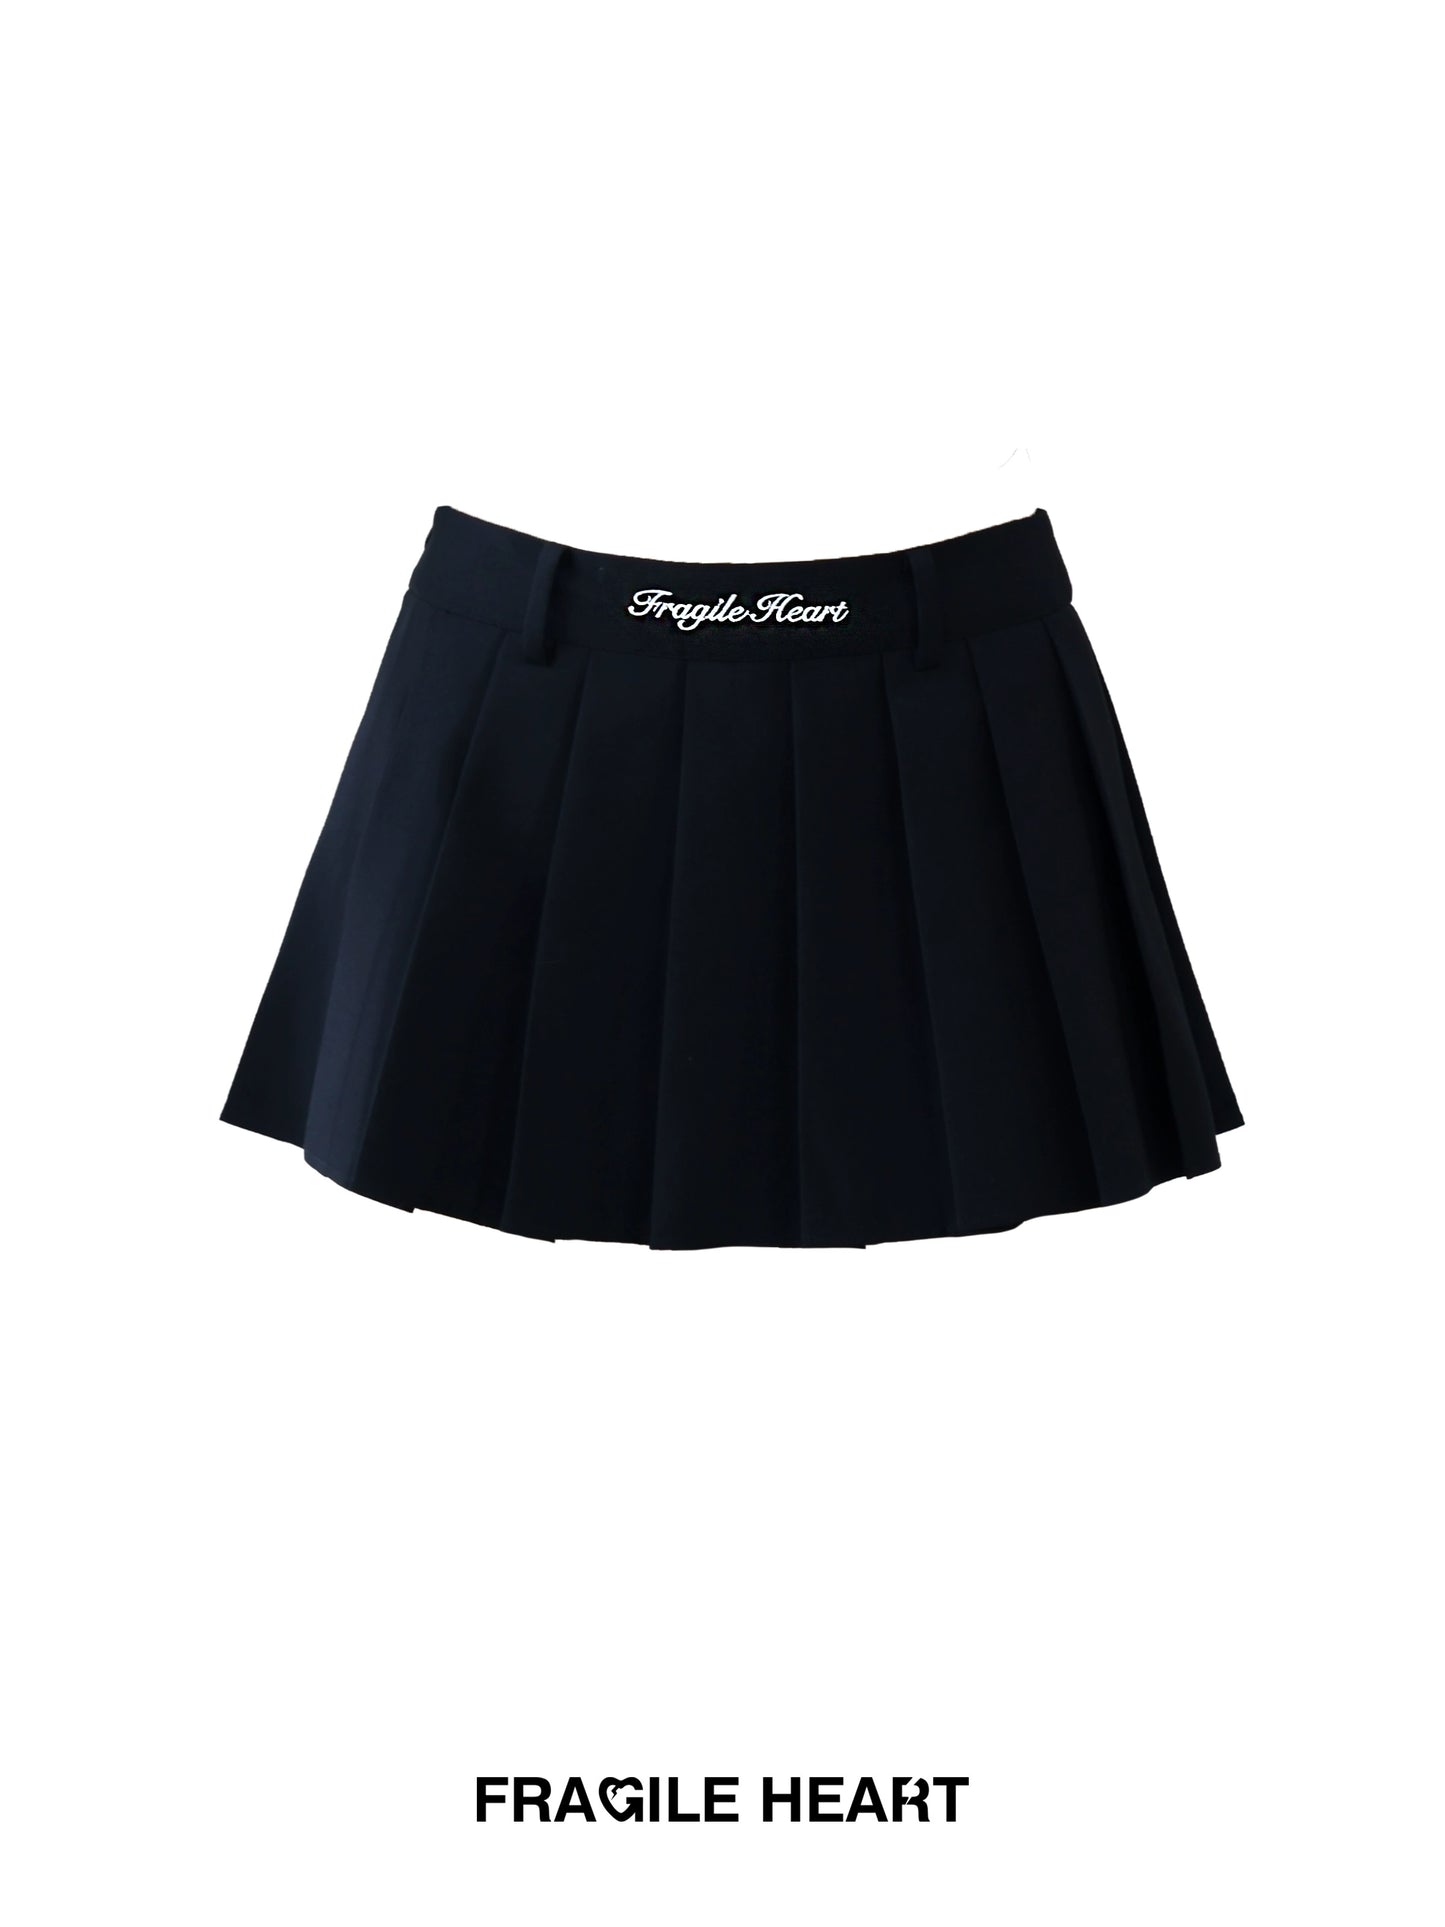 Embroidered Pleated Skirt, Anti-Glare Short